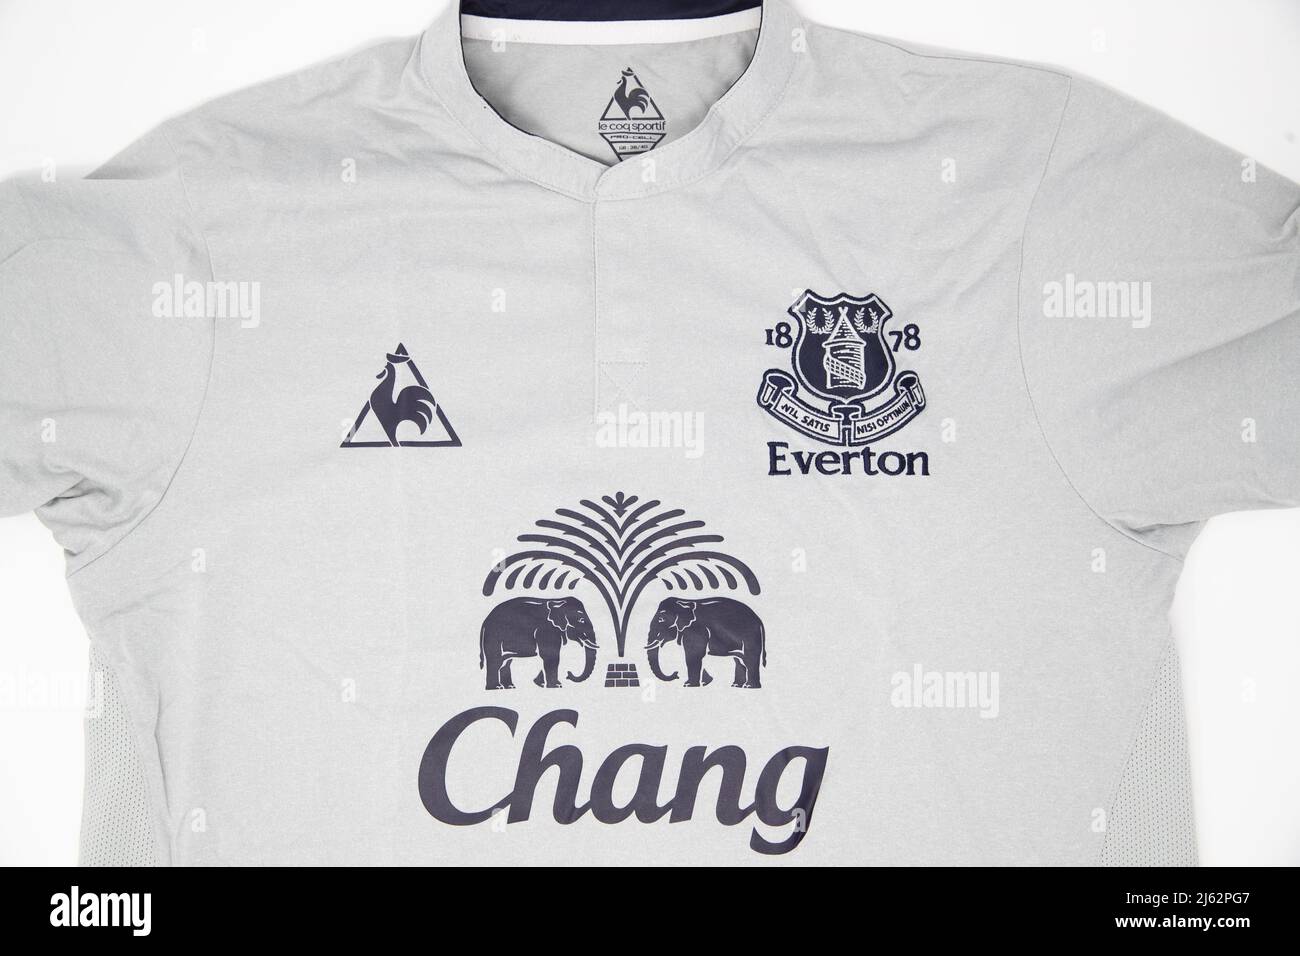 Everton badge on a white football shirt with Chang Sponsor Stock Photo